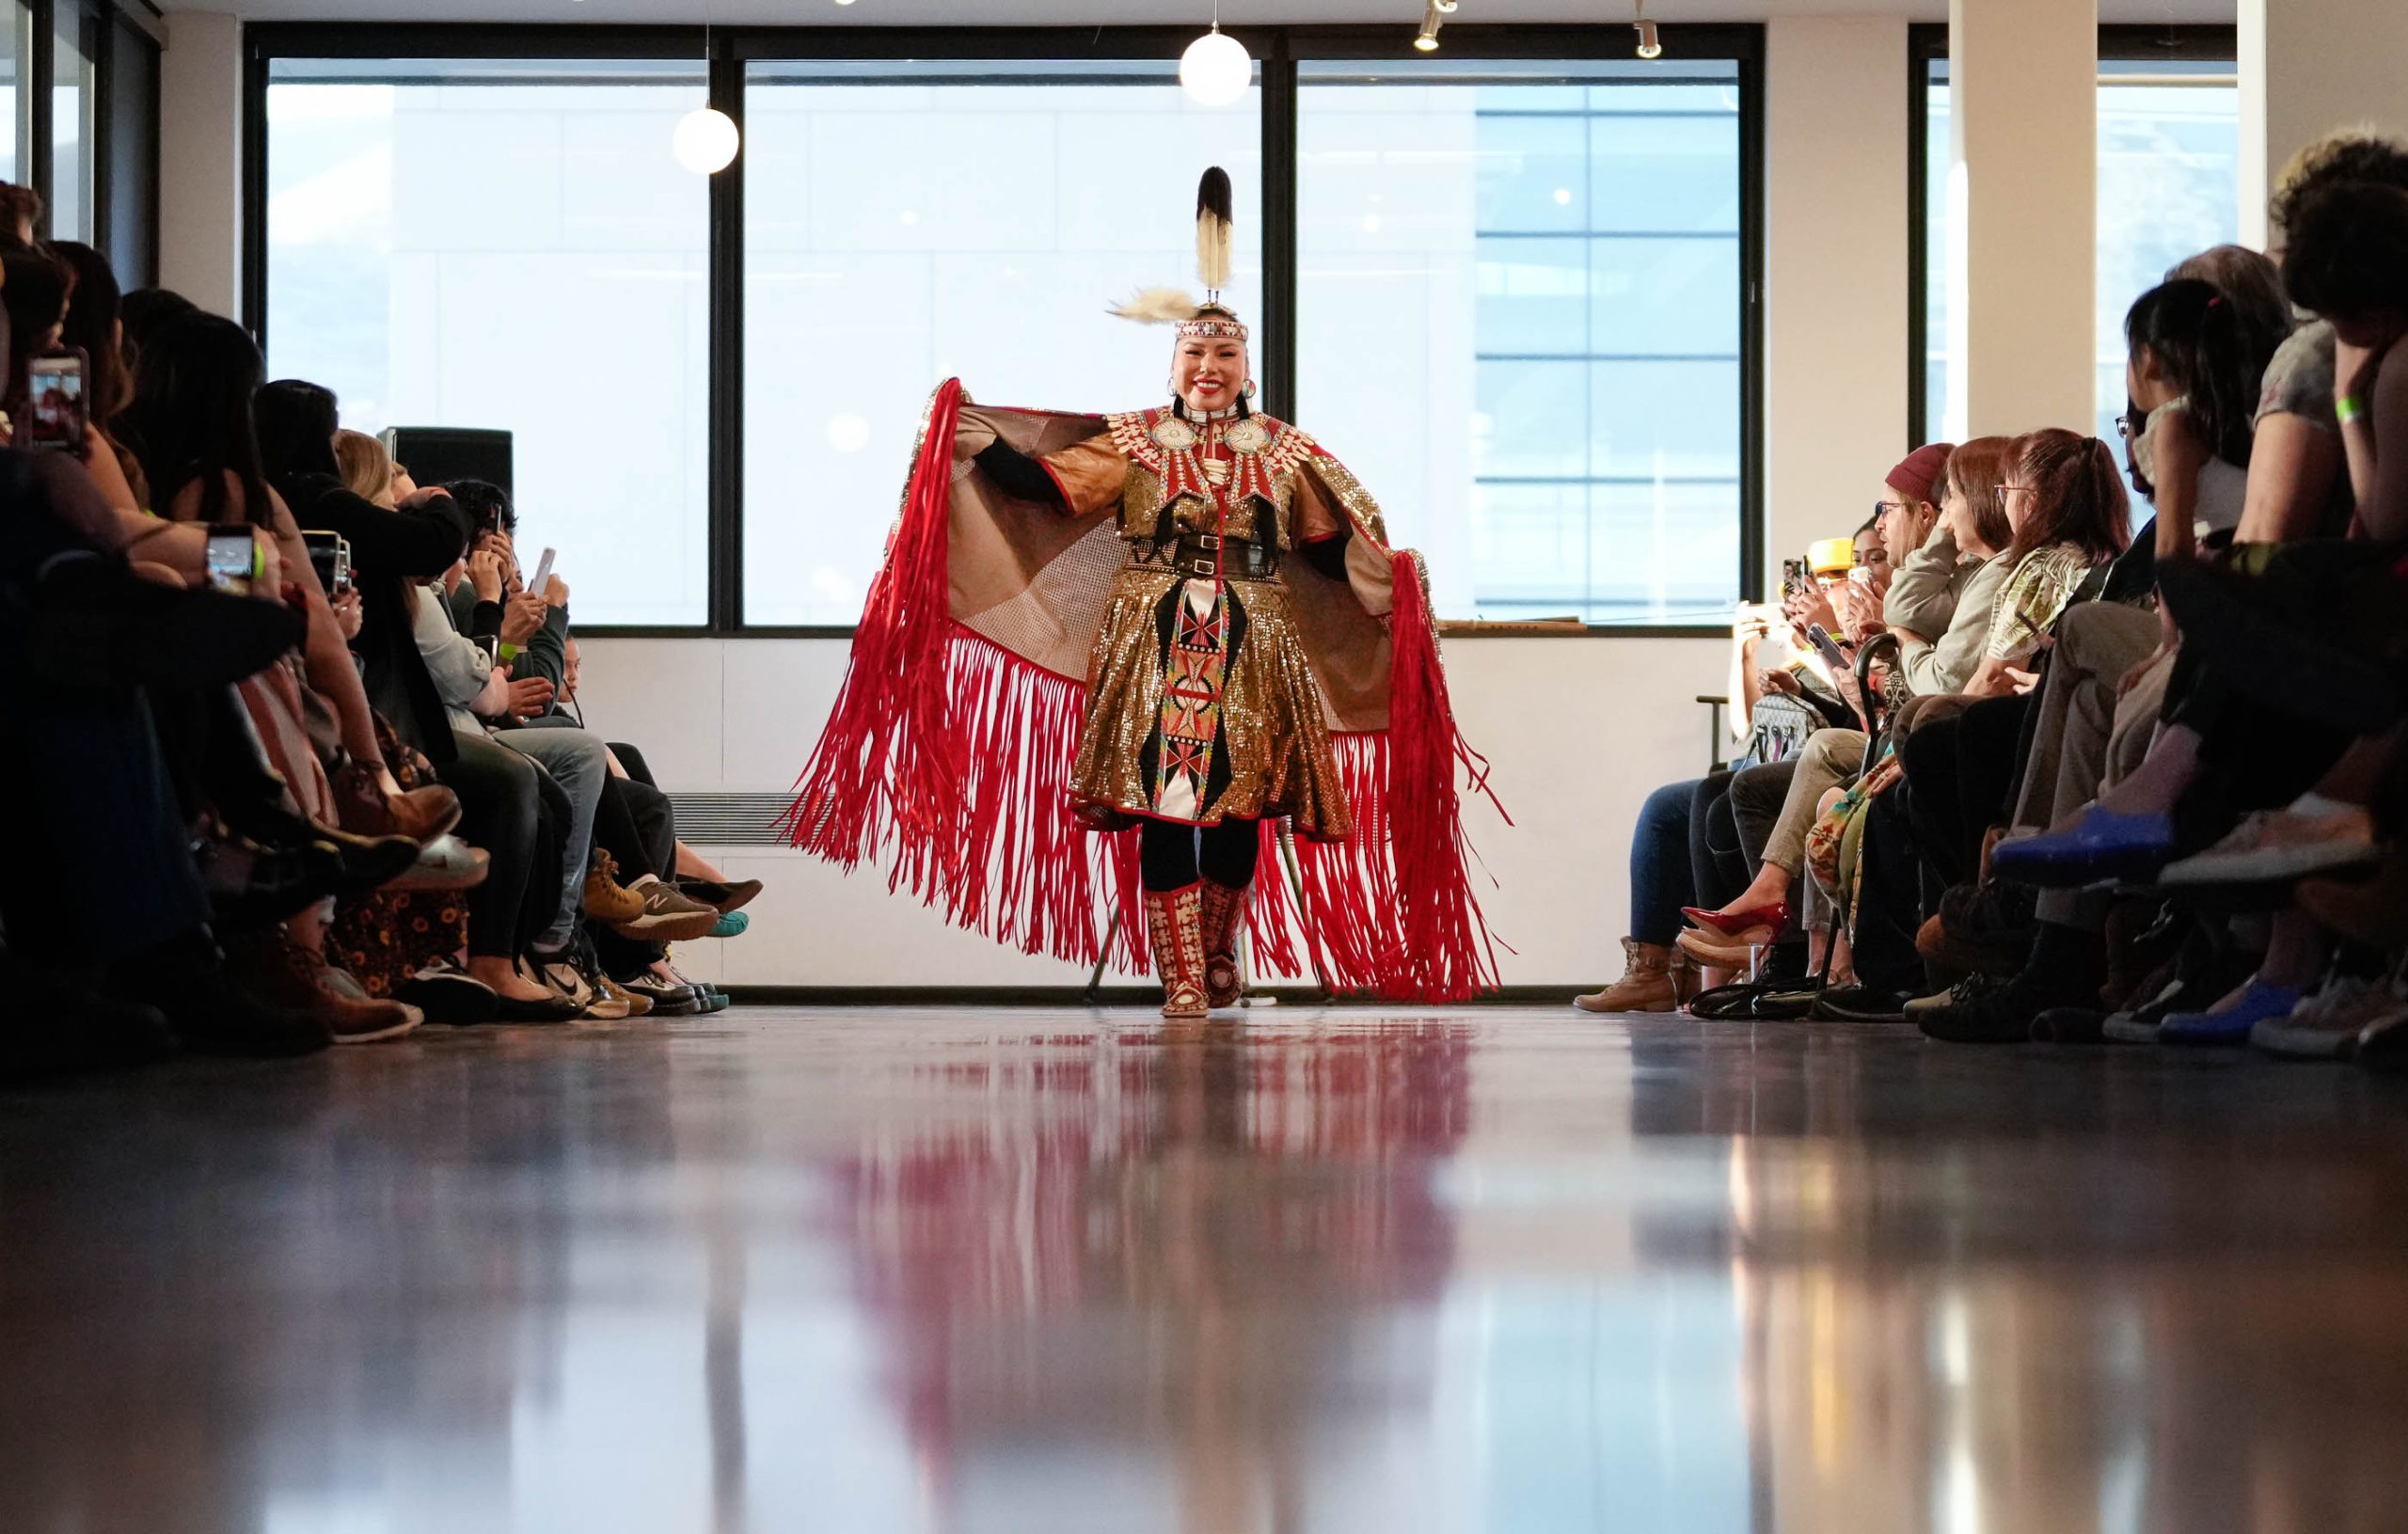 Salt Lake City witnessed a vibrant celebration of Indigenous culture and creativity at the second annual Utah Indigenous Fashion Week, held at the Leonardo Museum on Saturday. Organized by a dedicated group of volunteers under the banner of Utah Indigenous Fashion Week, the event brought together representatives from 12 different tribes, including models and designers, to showcase their talents and designs. Celebrating Indigenous Creativity: Highlights from Utah Indigenous Fashion Week